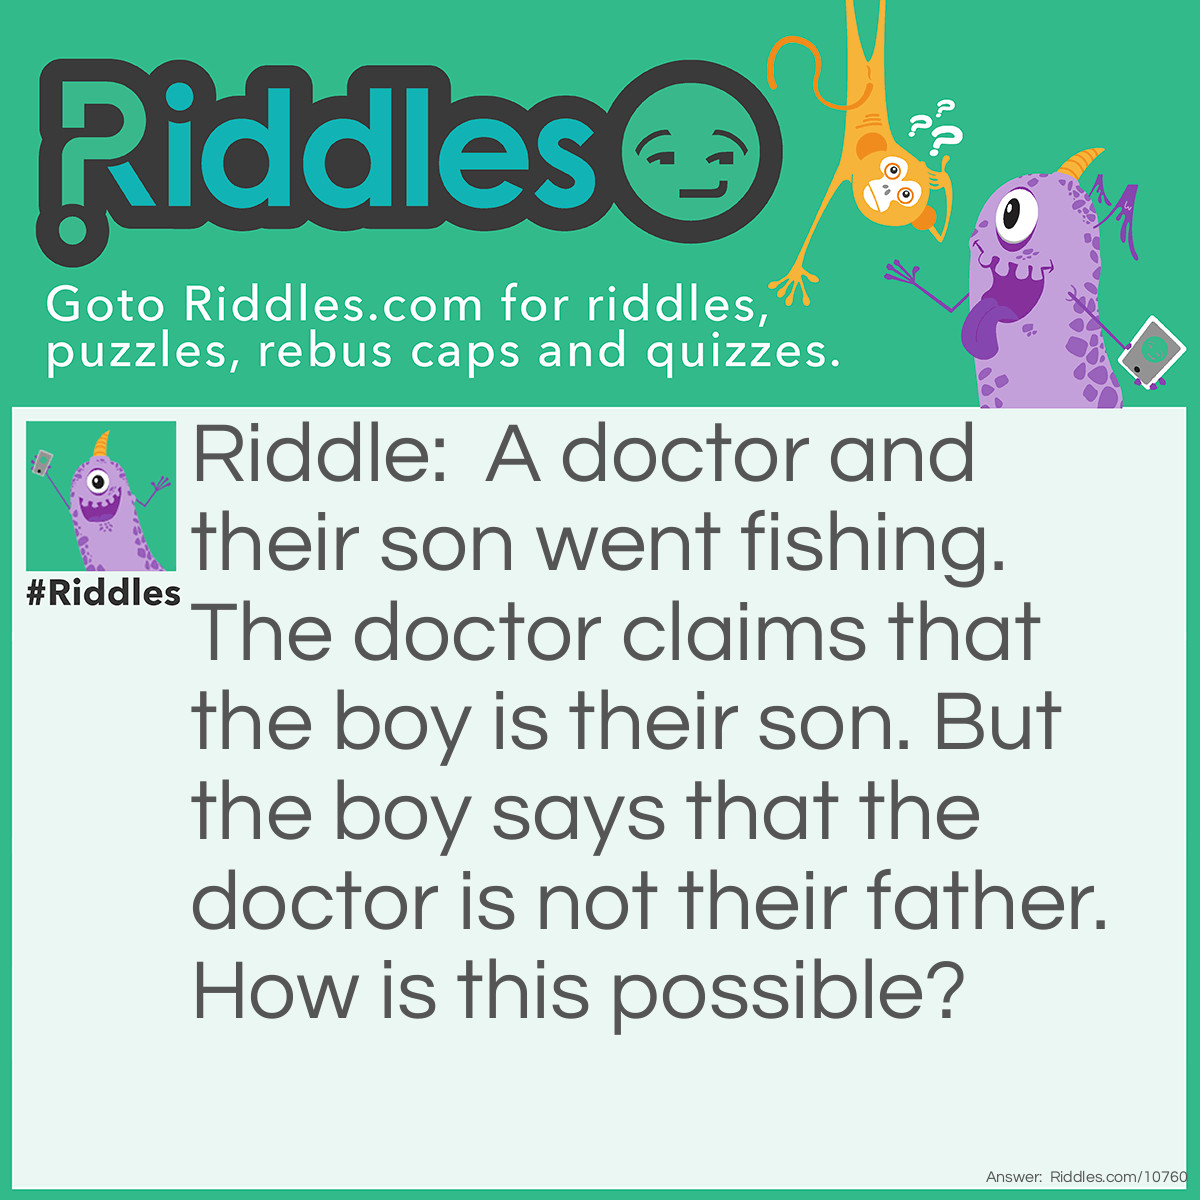 Riddle: A doctor and their son went fishing. The doctor claims that the boy is their son. But the boy says that the doctor is not their father. How is this possible? Answer: The doctor is simply the boy's mother.